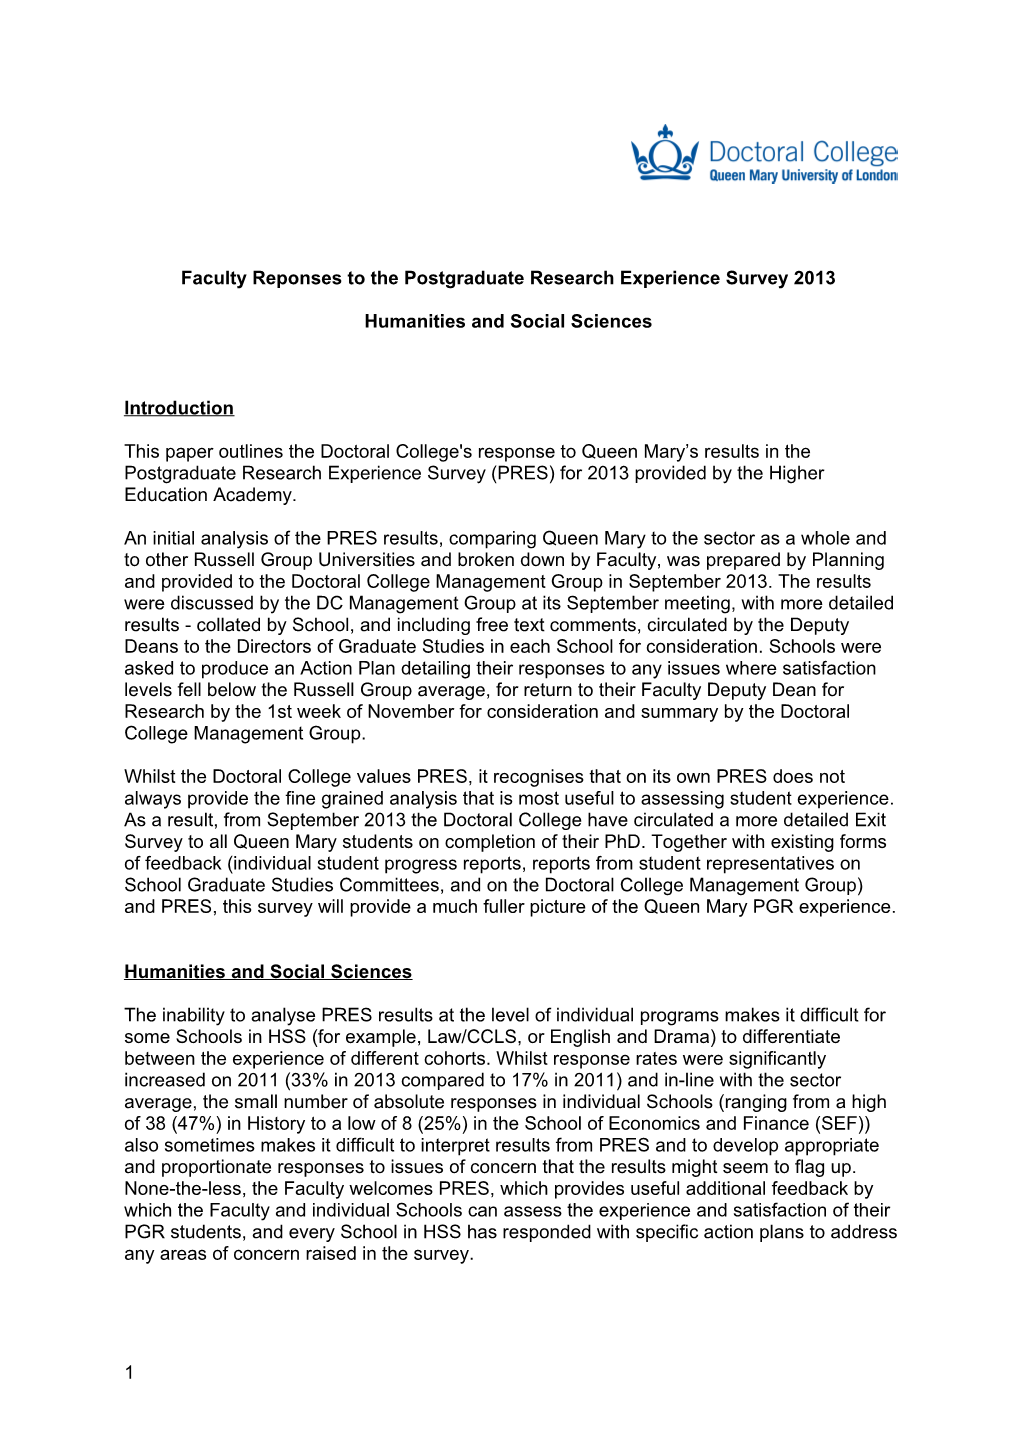 Faculty Reponses to the Postgraduate Research Experience Survey 2013